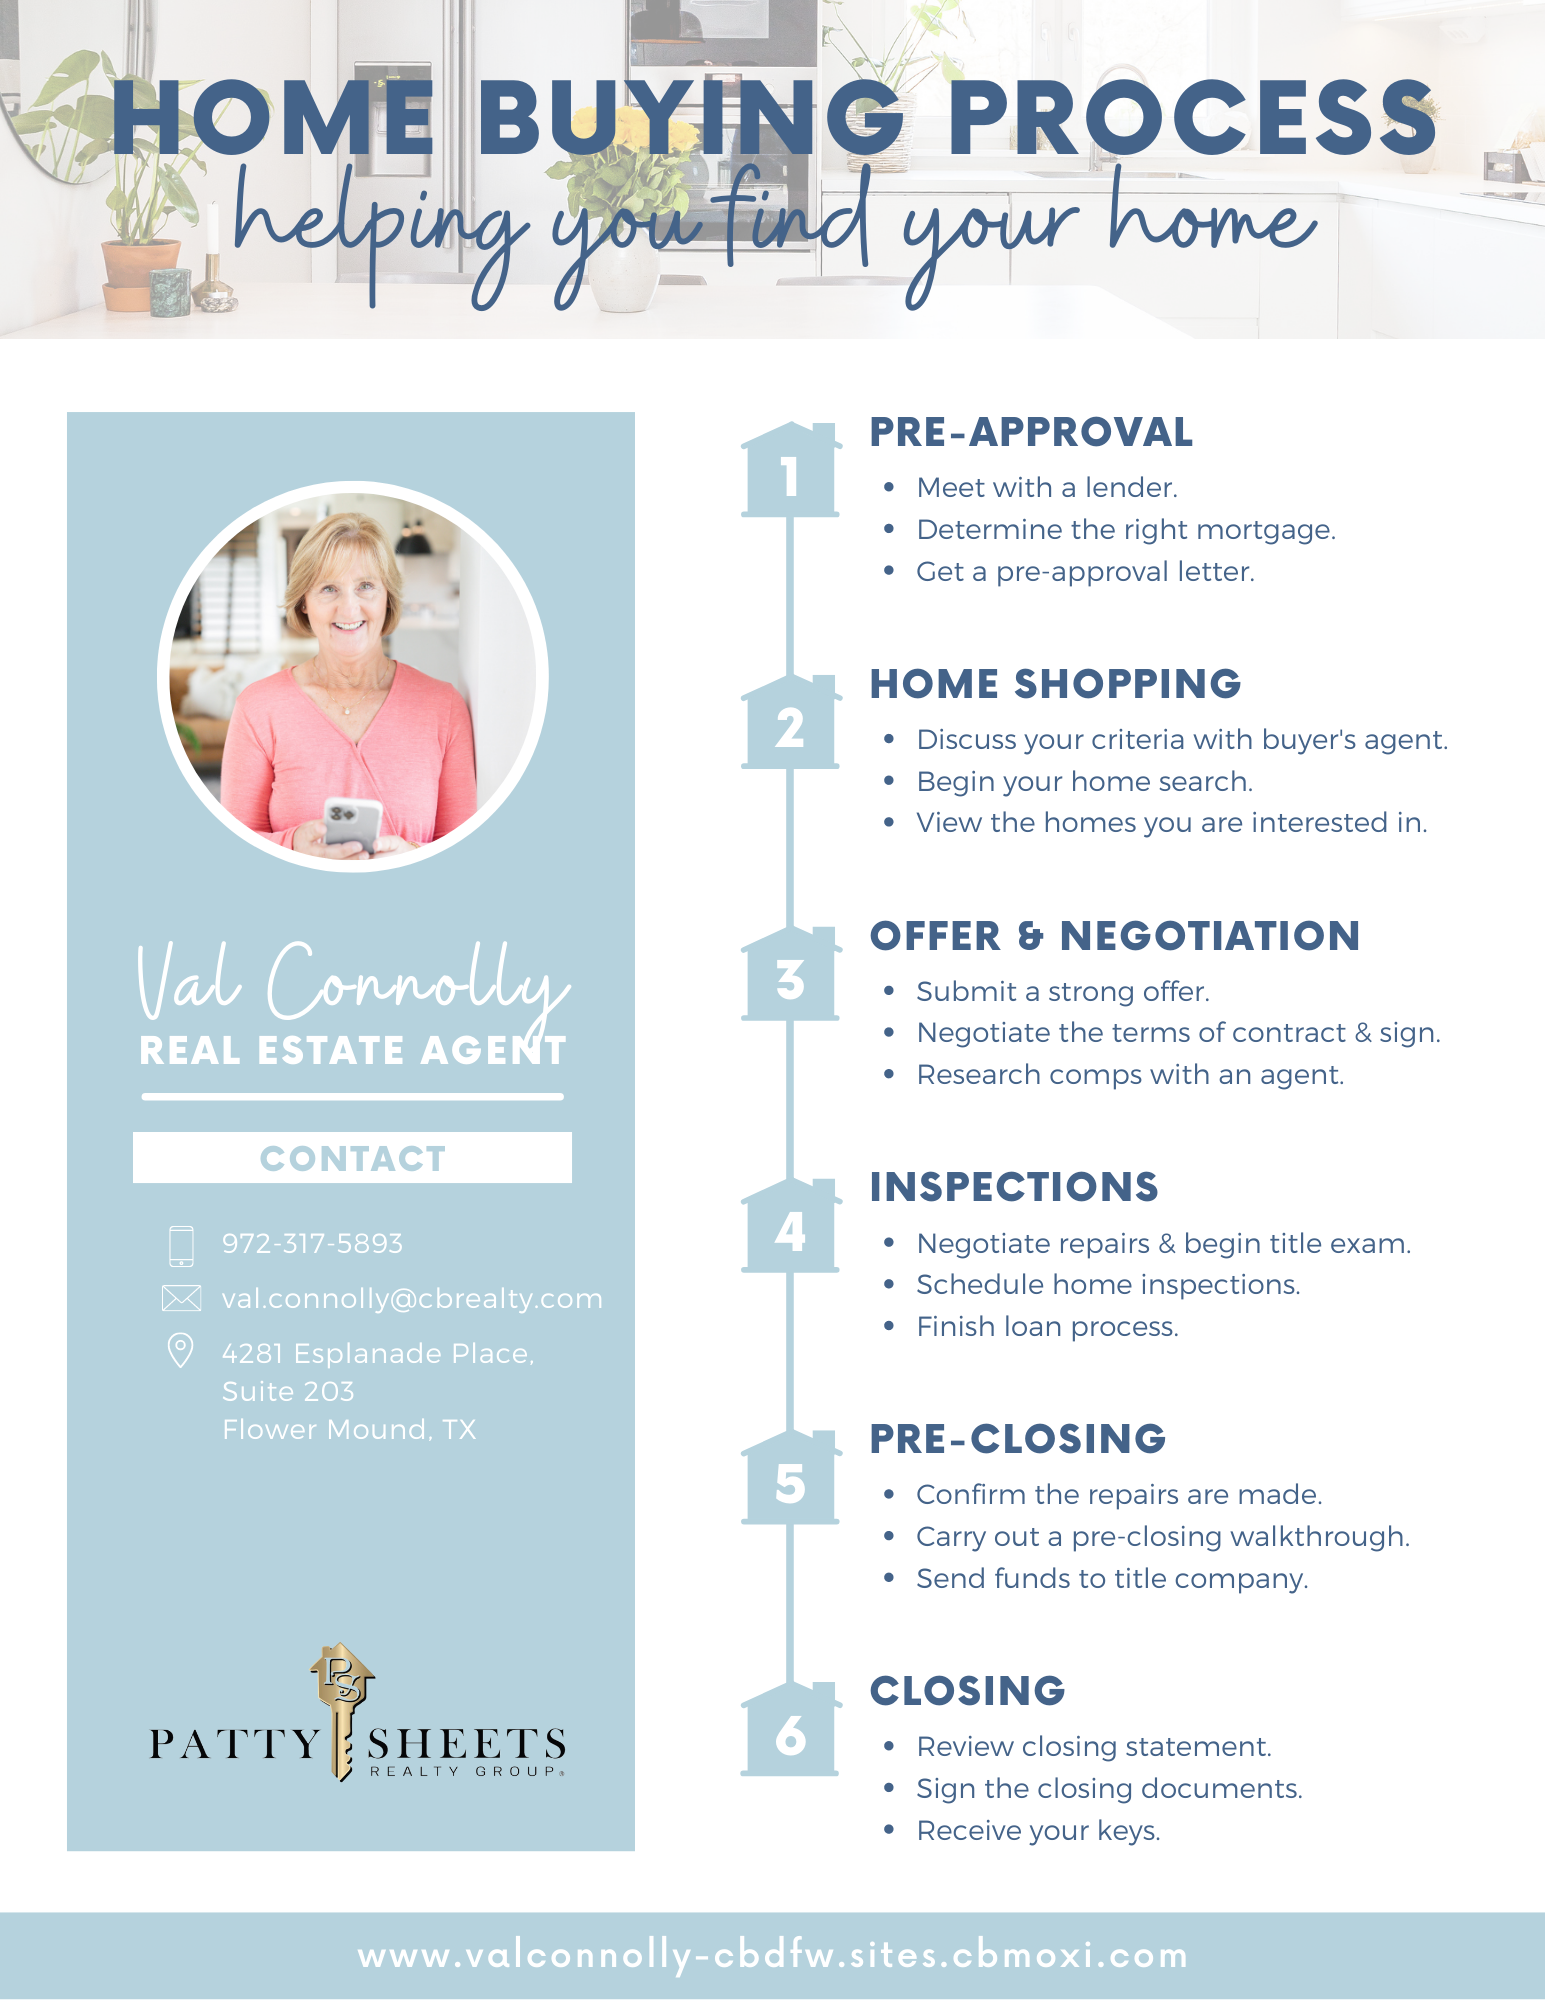 Val Connolly - Home Buying Process